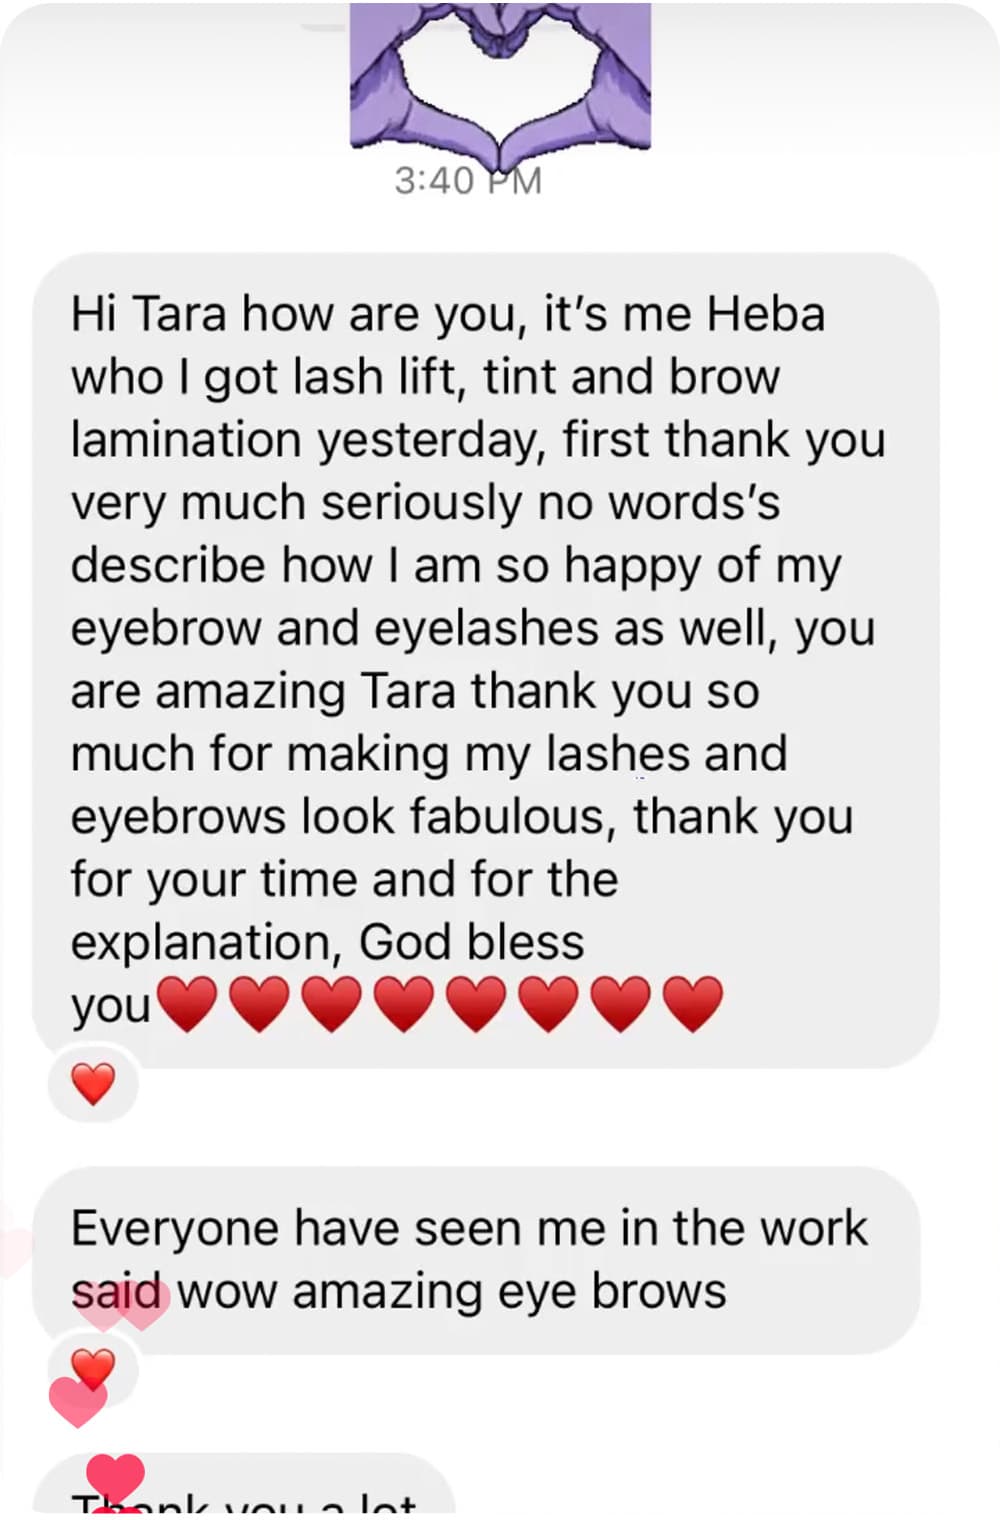 hi tara how are you, its me heba who i got lash lift, tint and brow lamination yesterday, first thank you very much seriously no words descirbe how i am so happy of my eyebrow and eyelashes as well. you are amazing Tara thank you so much for making my lashes and eyebrows look favulous, thank you for your time and for the explanation god bless you. Everyone have seen me in the work said wow amazing eye brows.